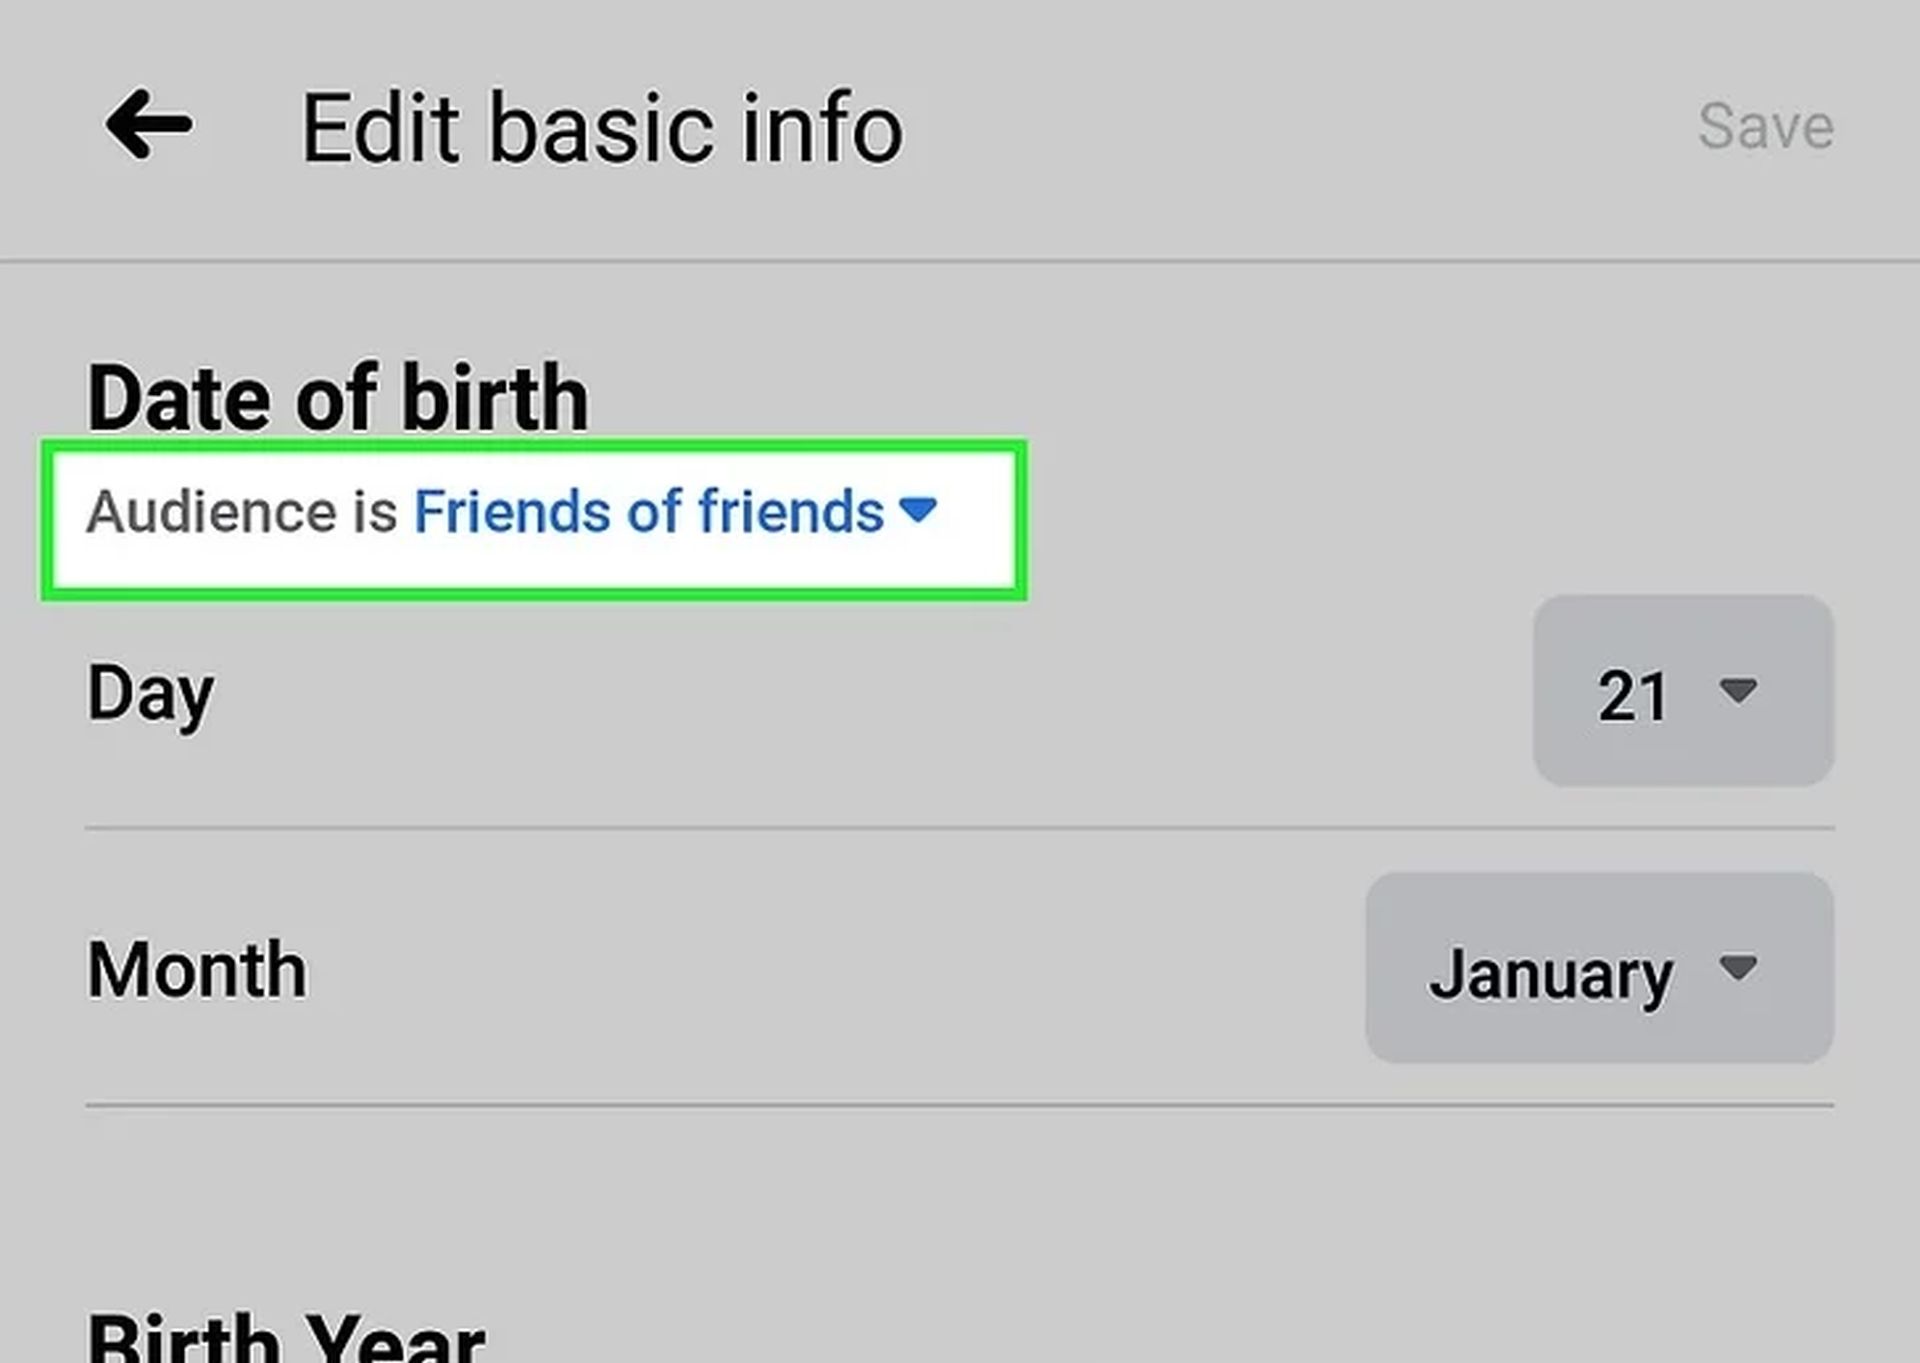 Today, we are going to go over how to change your birthday on Facebook and how to hide your birthday so you can customize your profile however you want to.